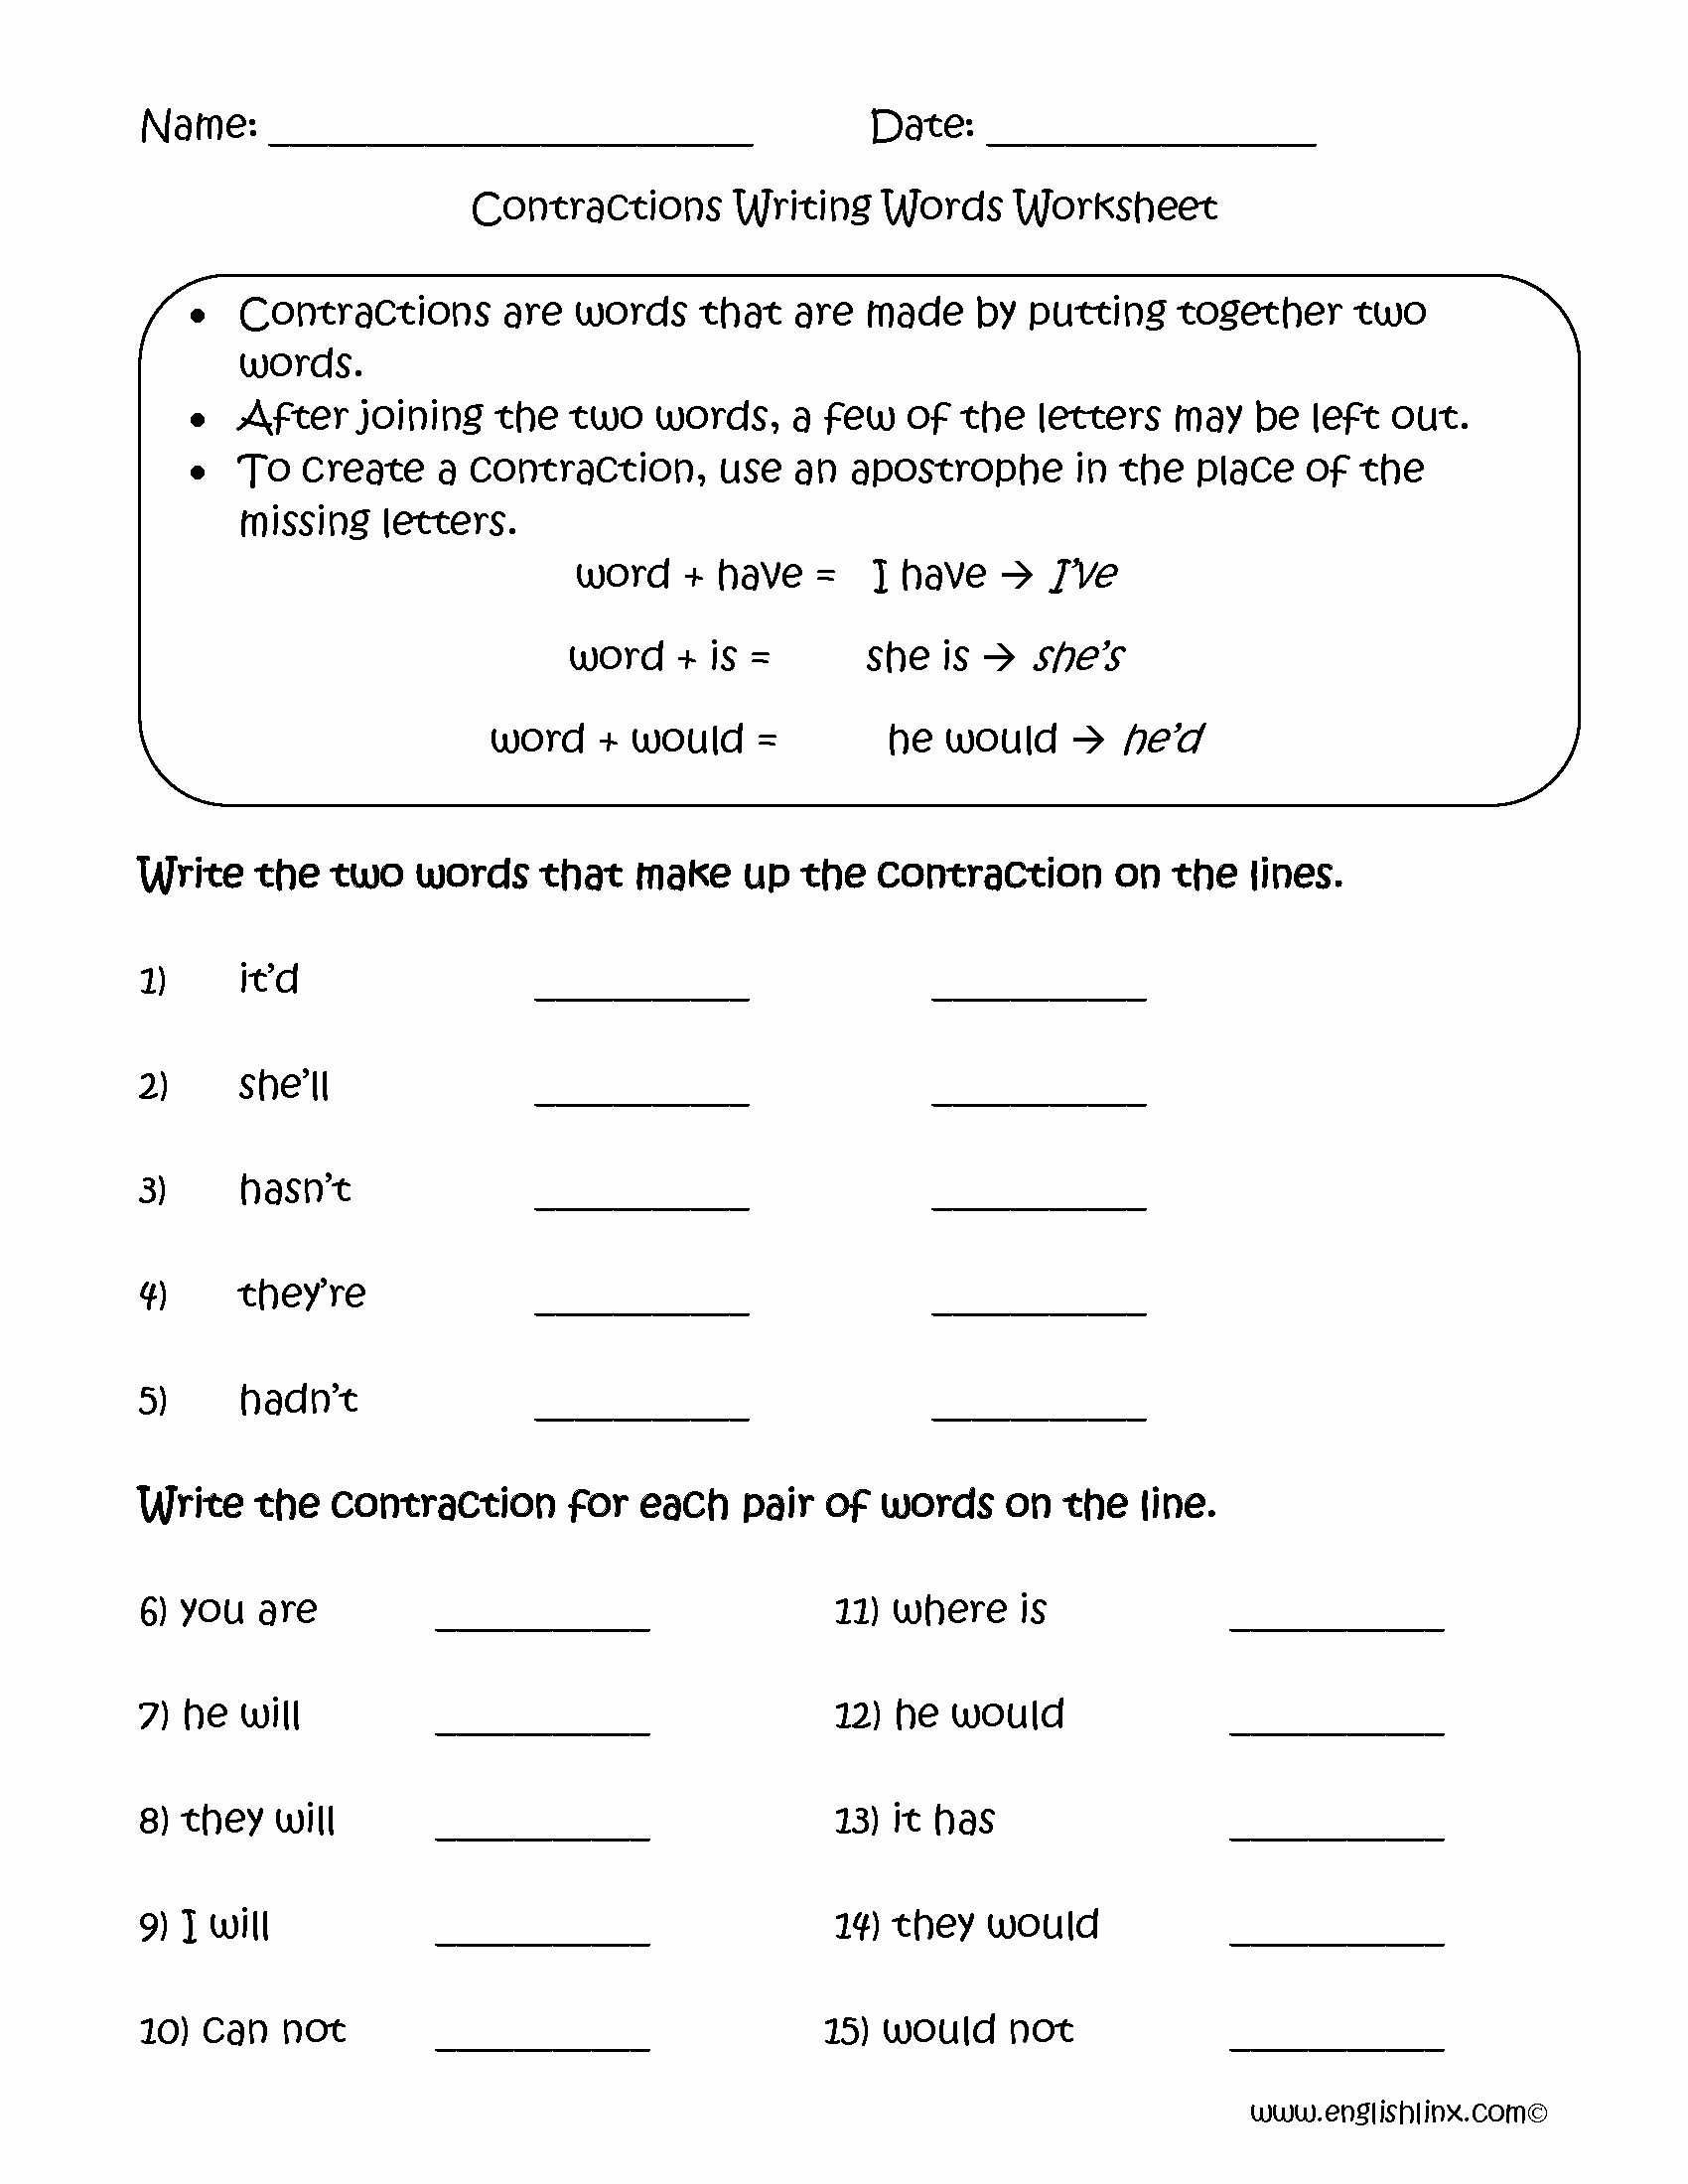 Contractions Worksheet 2nd Grade Fresh Contractions Writing Words Worksheet